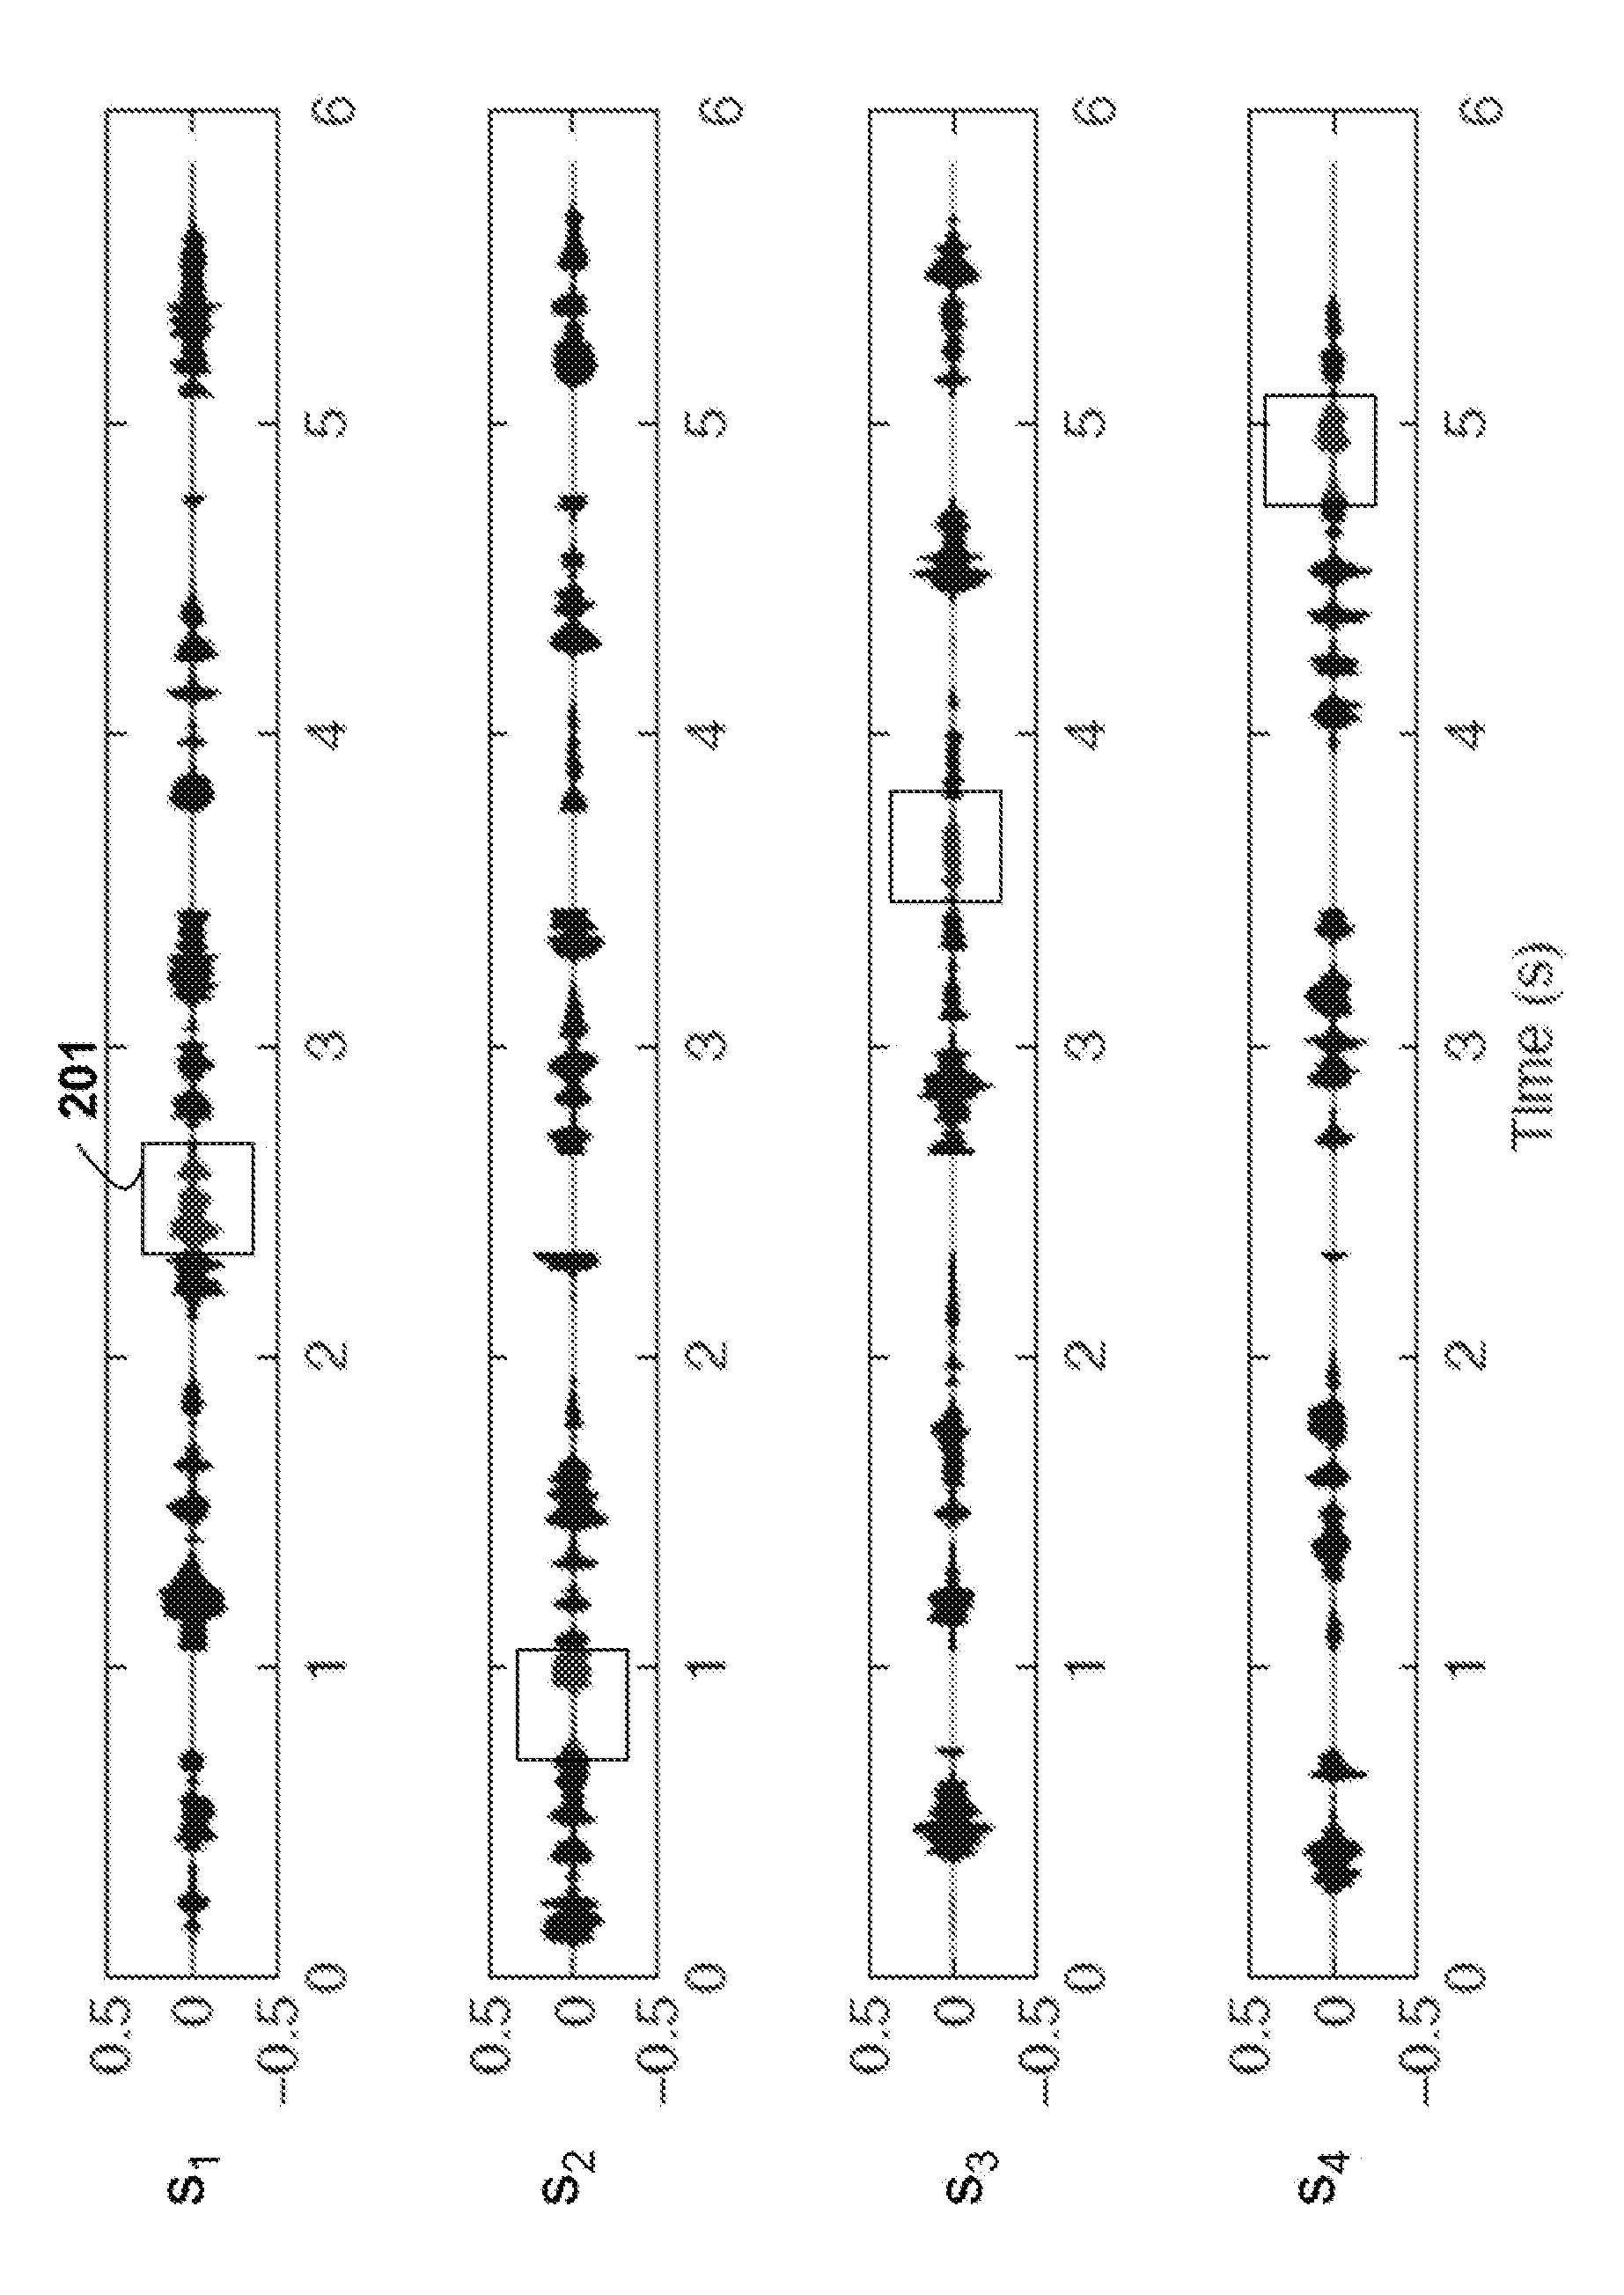 Method and System for Reducing Interference and Noise in Speech Signals